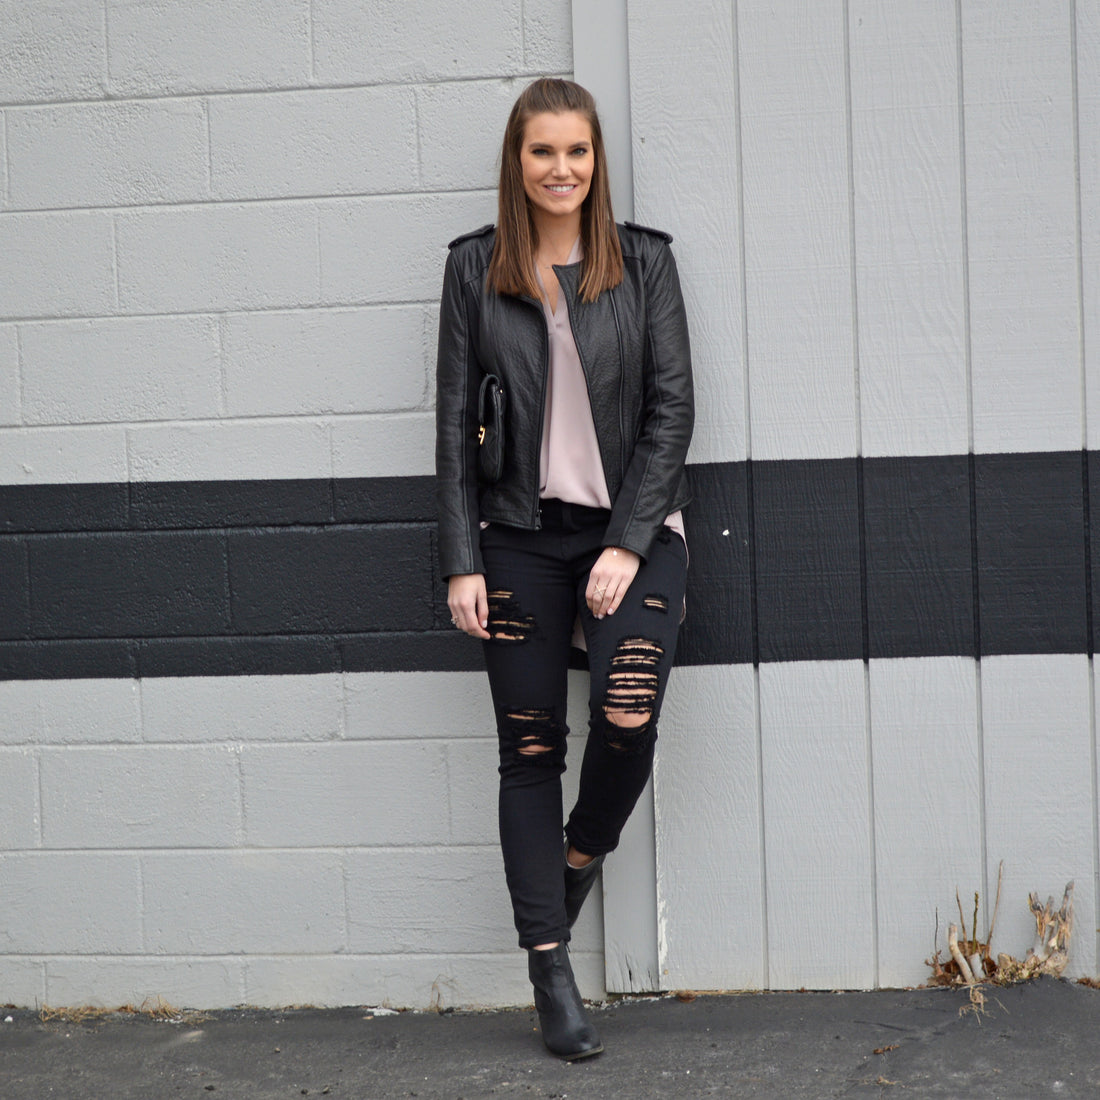 Fave Tunic + Black Distressed Jeans